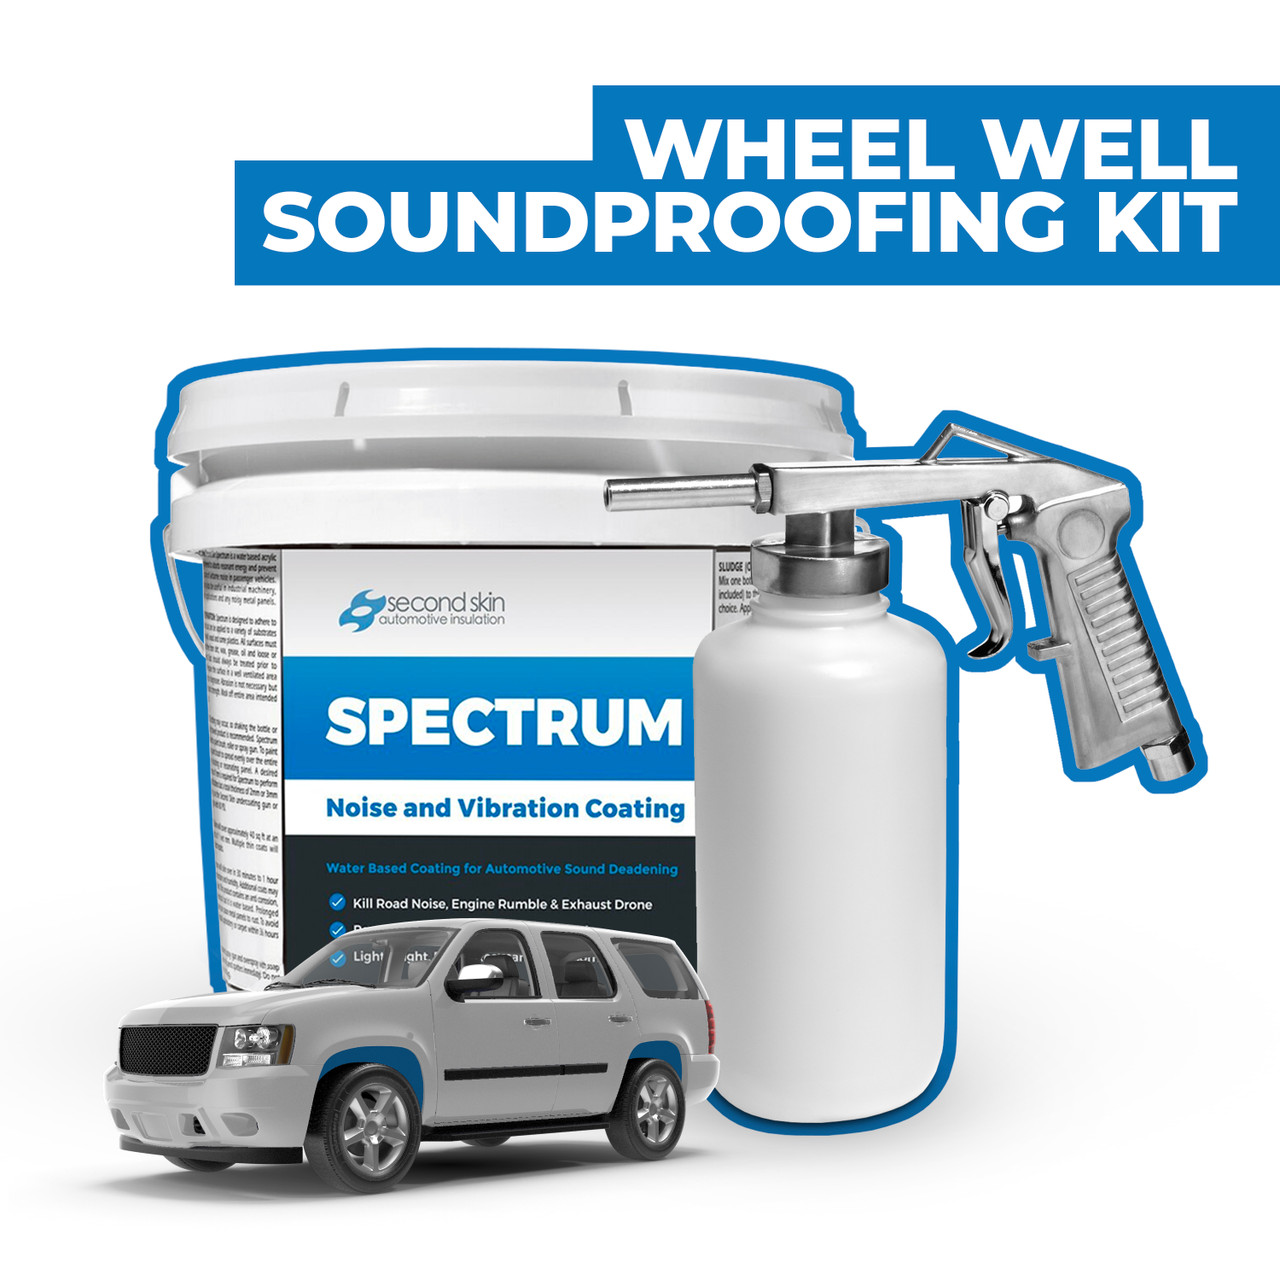 All about Car Soundproofing: Methods, Benefits & More